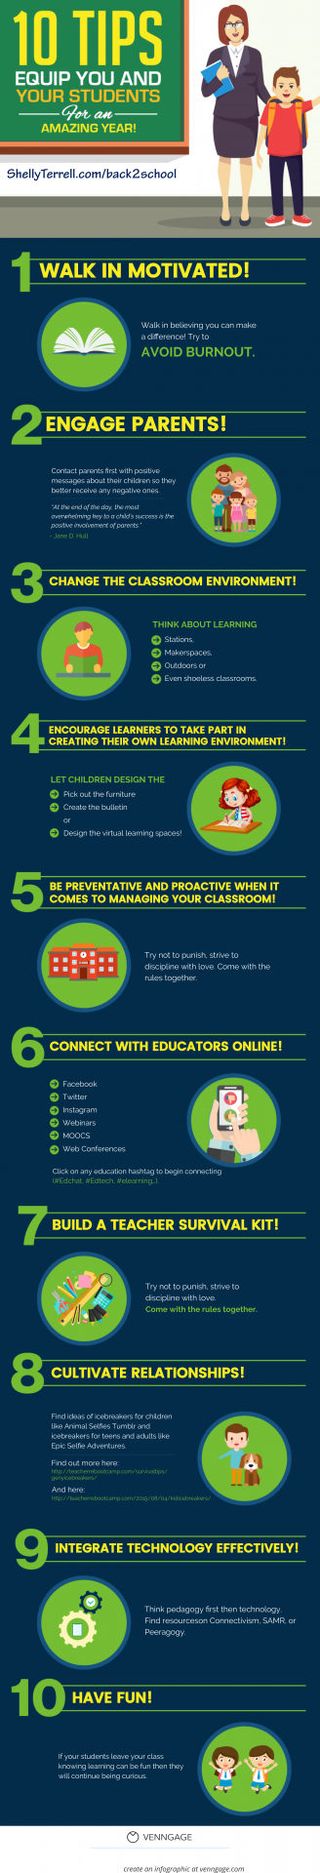 Infographic: 10 tips equip you and your students for an amazing year